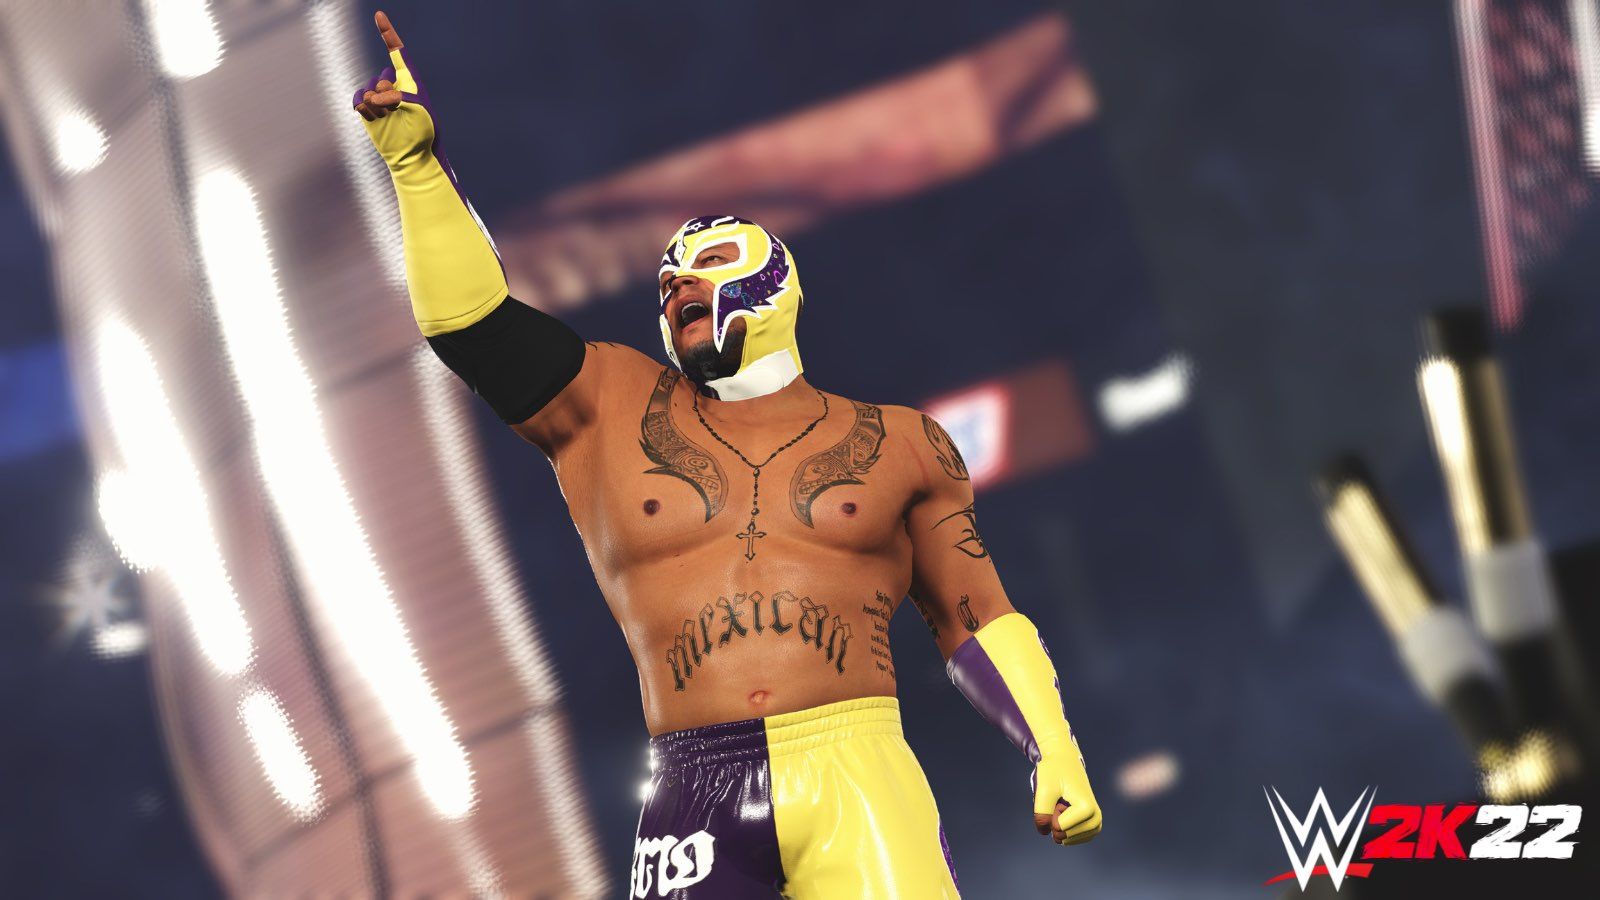 Rey Mysterio points upwards in a yellow mask and trunks in WWE 2K22.